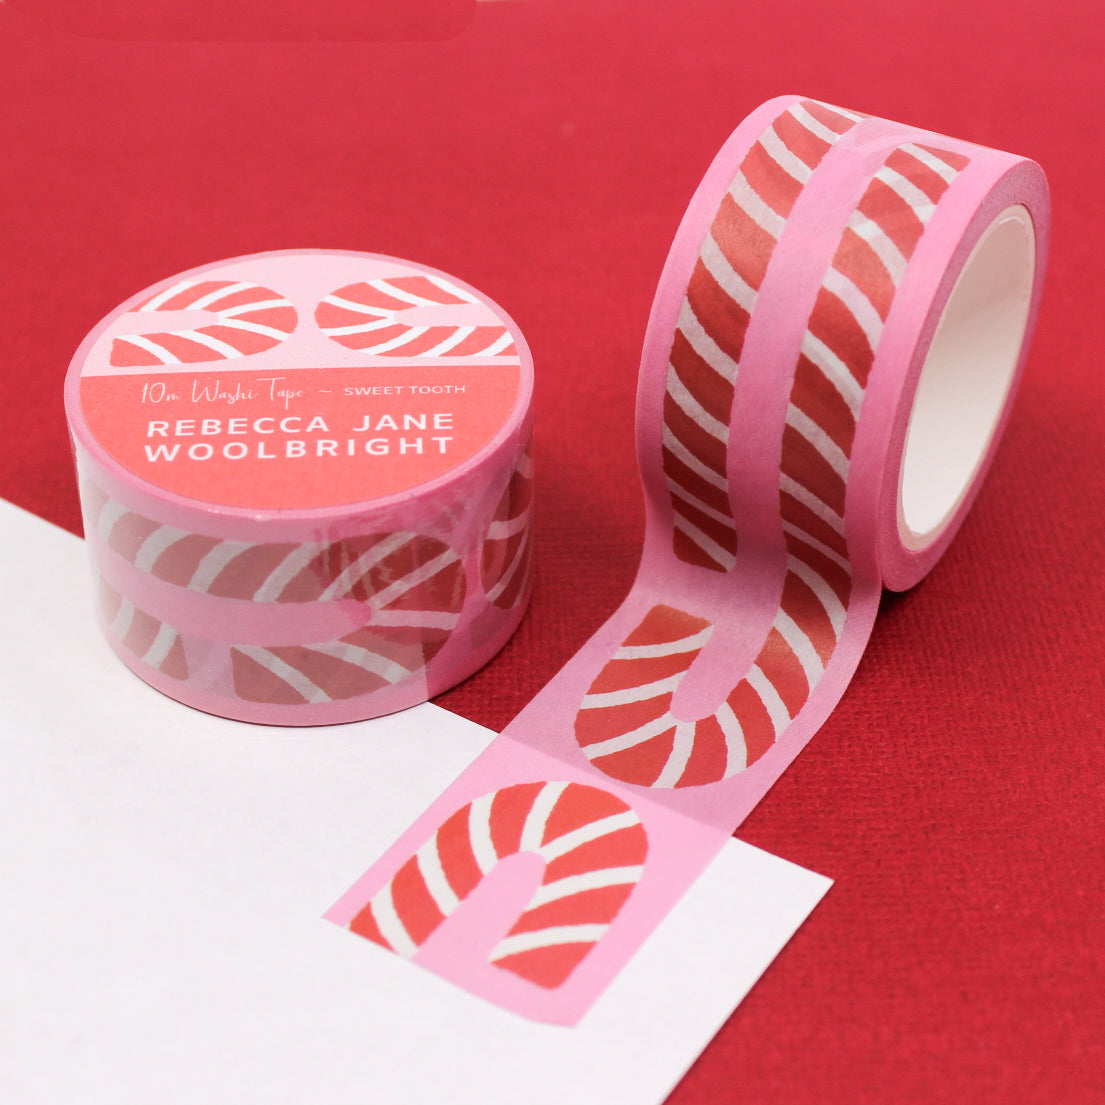 Sweet Tooth Candy Cane Washi Tape showcasing delightful candy canes in a whimsical pattern, adding a sugary and festive flair to your crafting or holiday-themed projects. This tape is from Rebecca Jane Woolbright and sold at BBB Supplies Craft Shop.